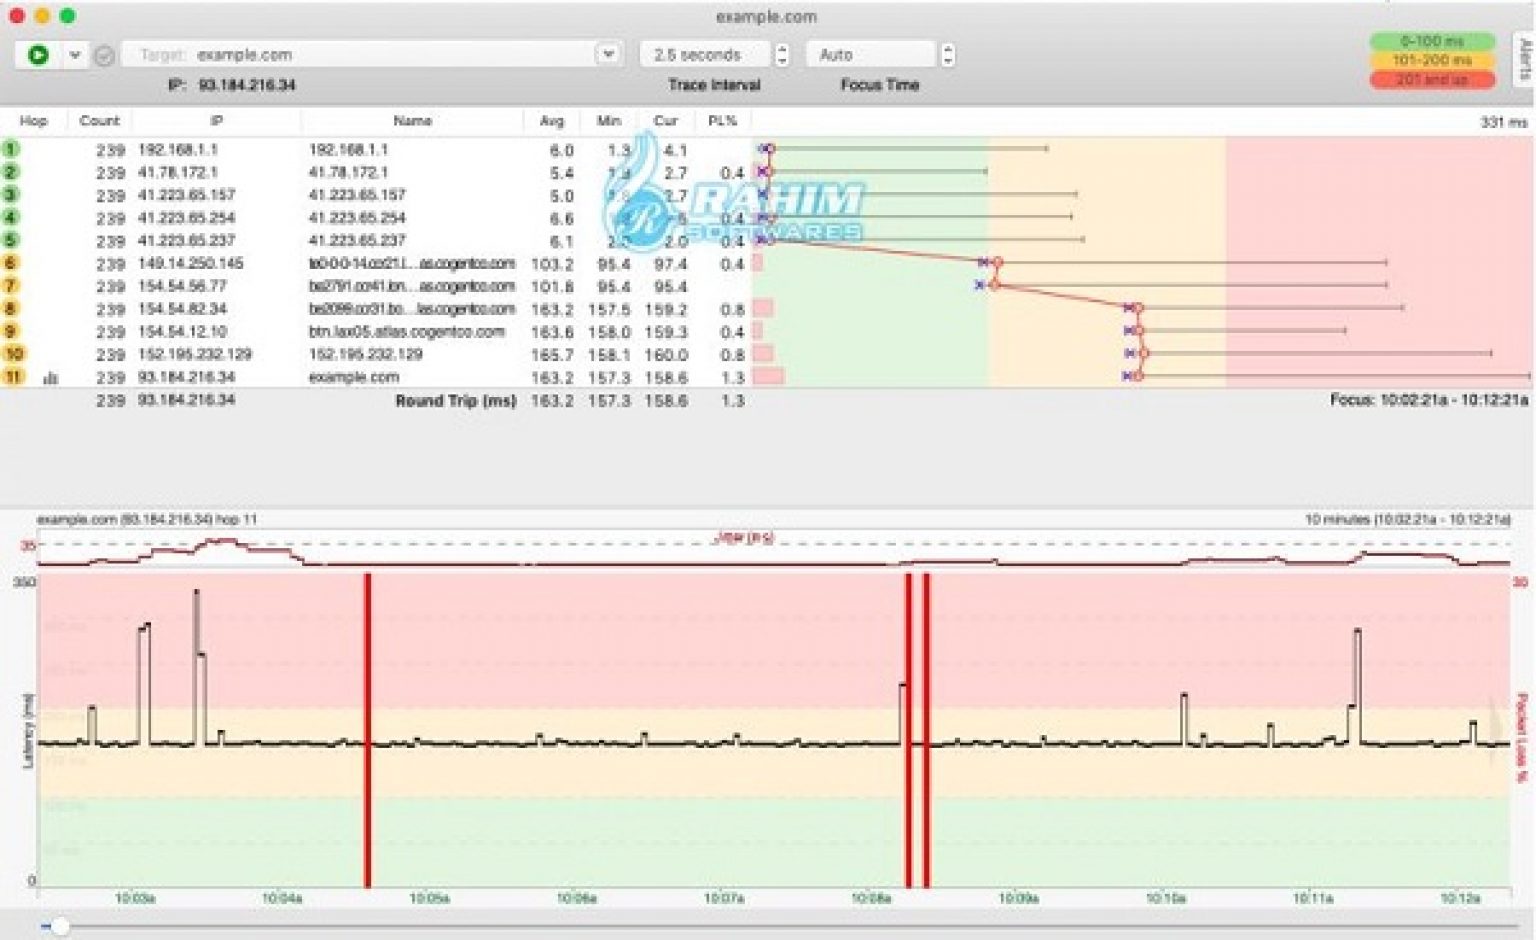 download the new version PingPlotter Pro 5.24.3.8913